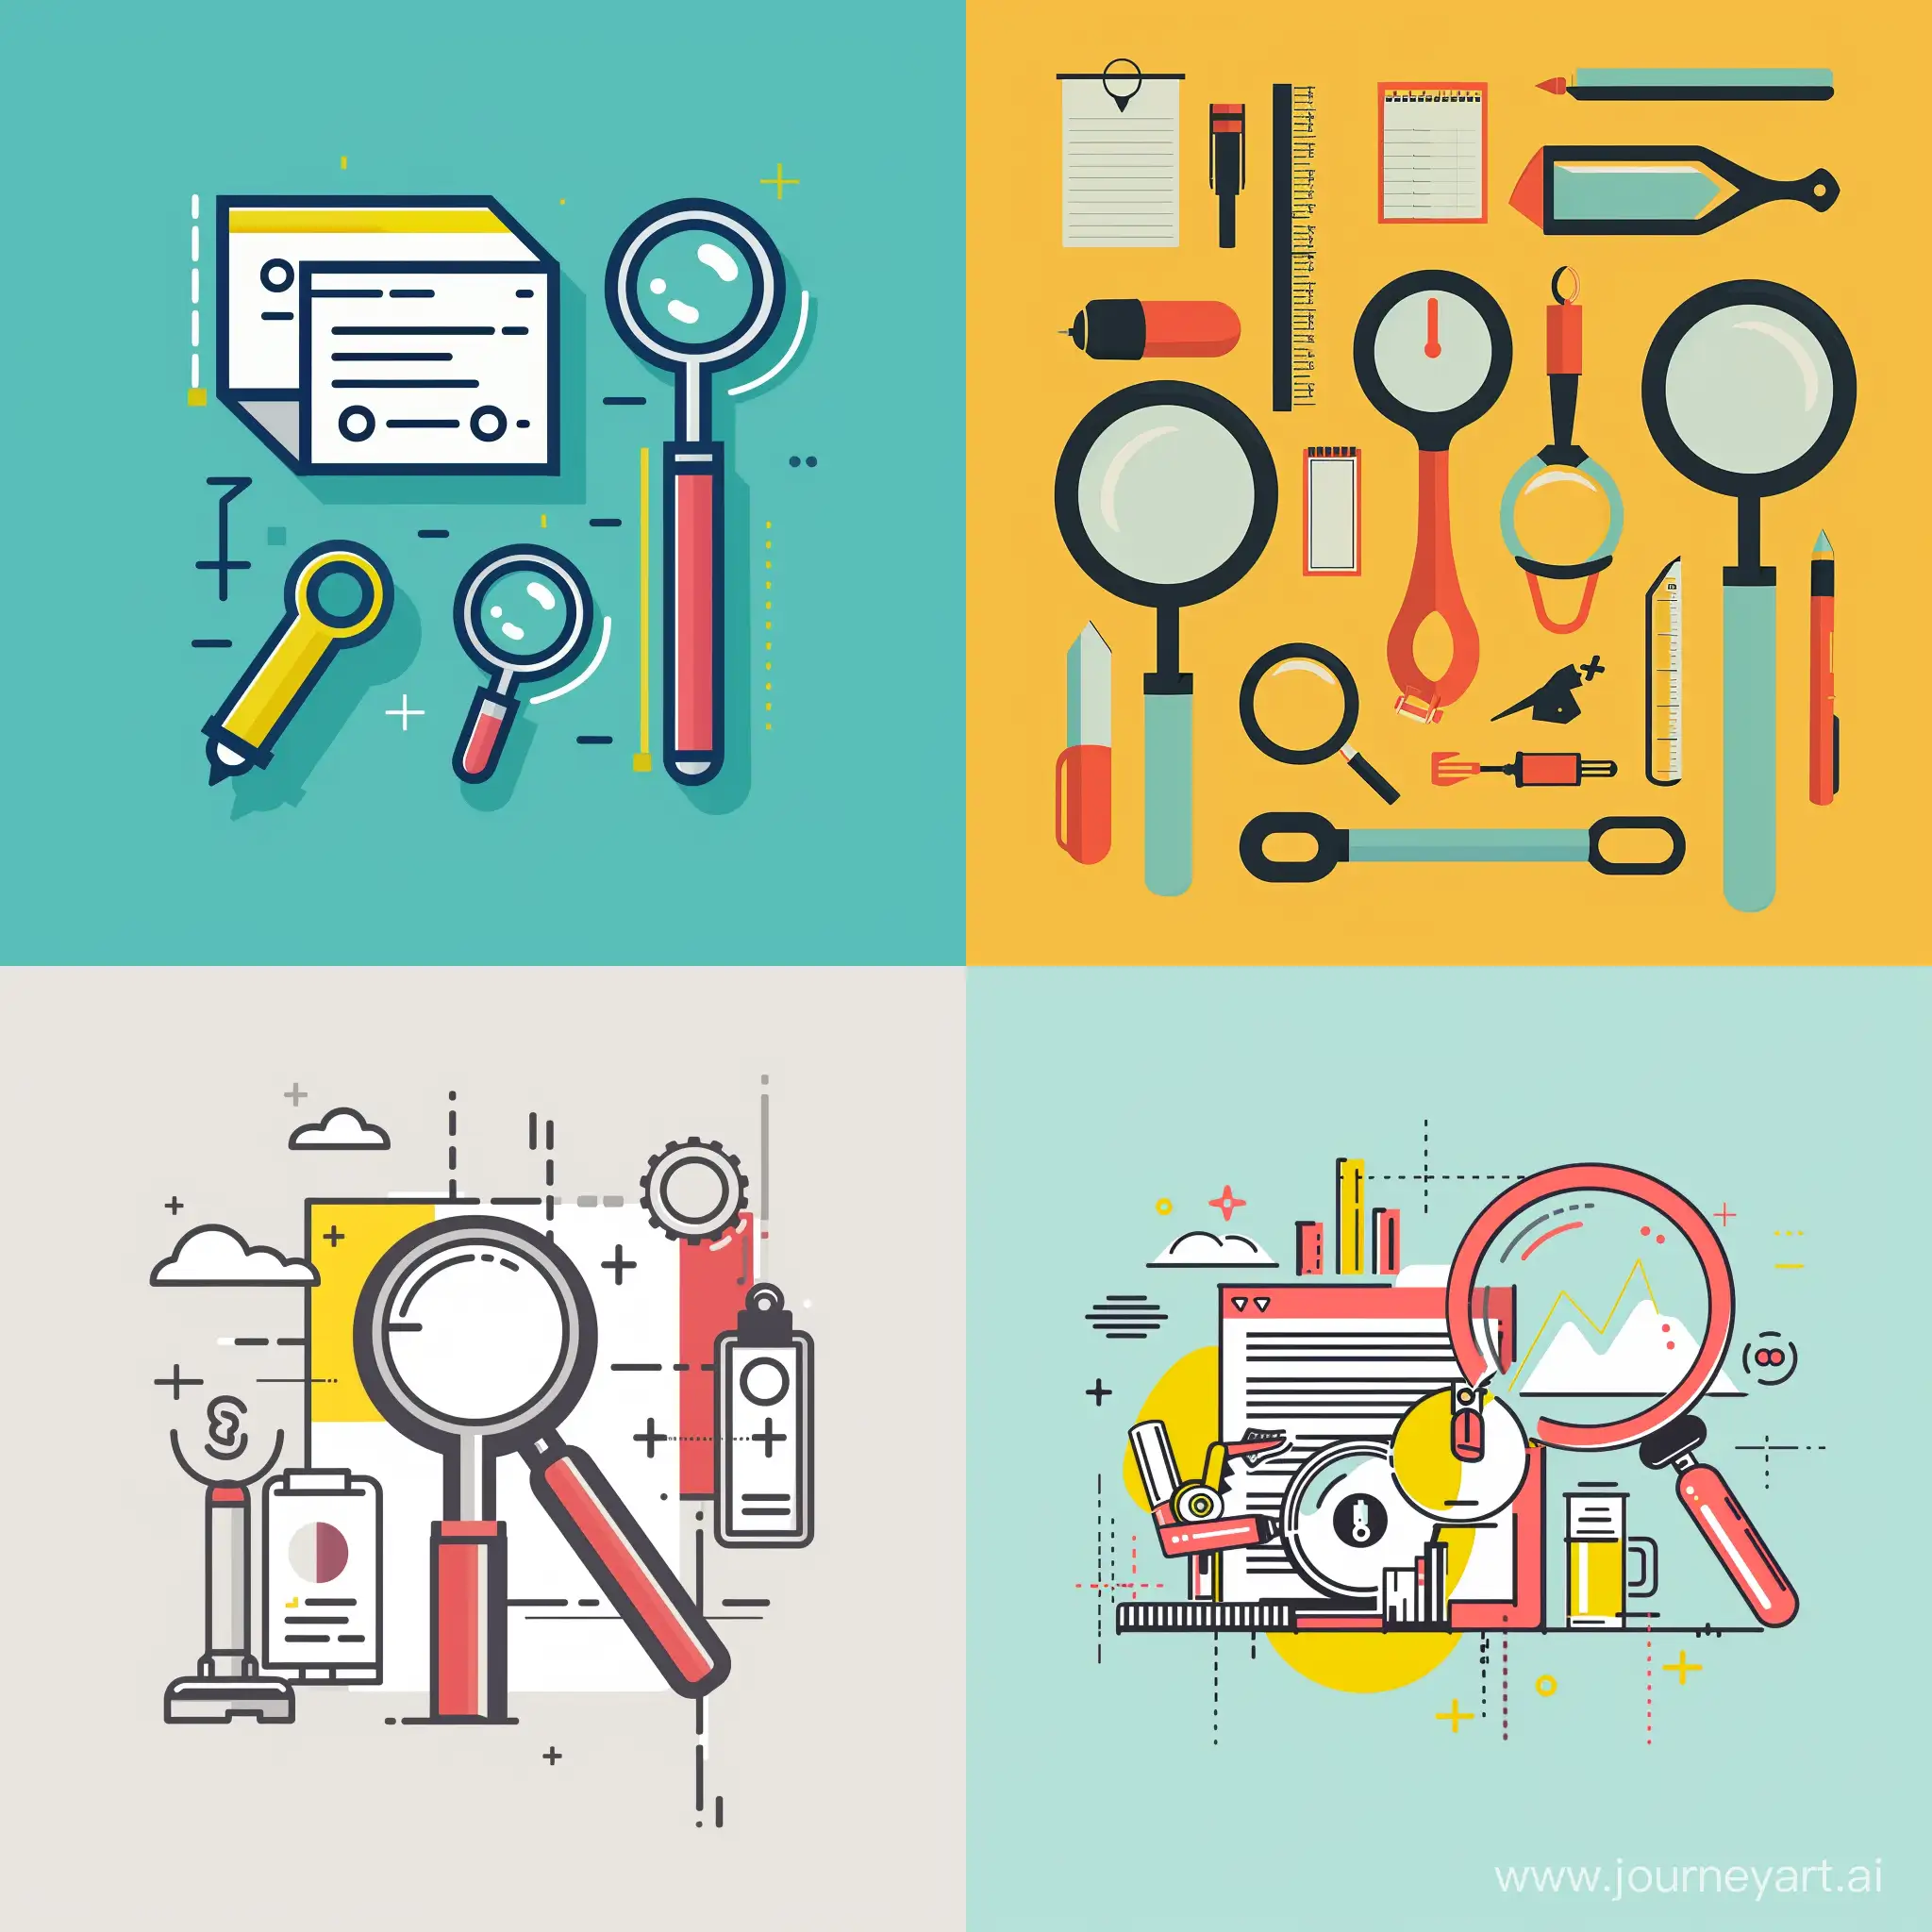 illustration a minimal graphic image "Keyword research tools" with a plain color background


